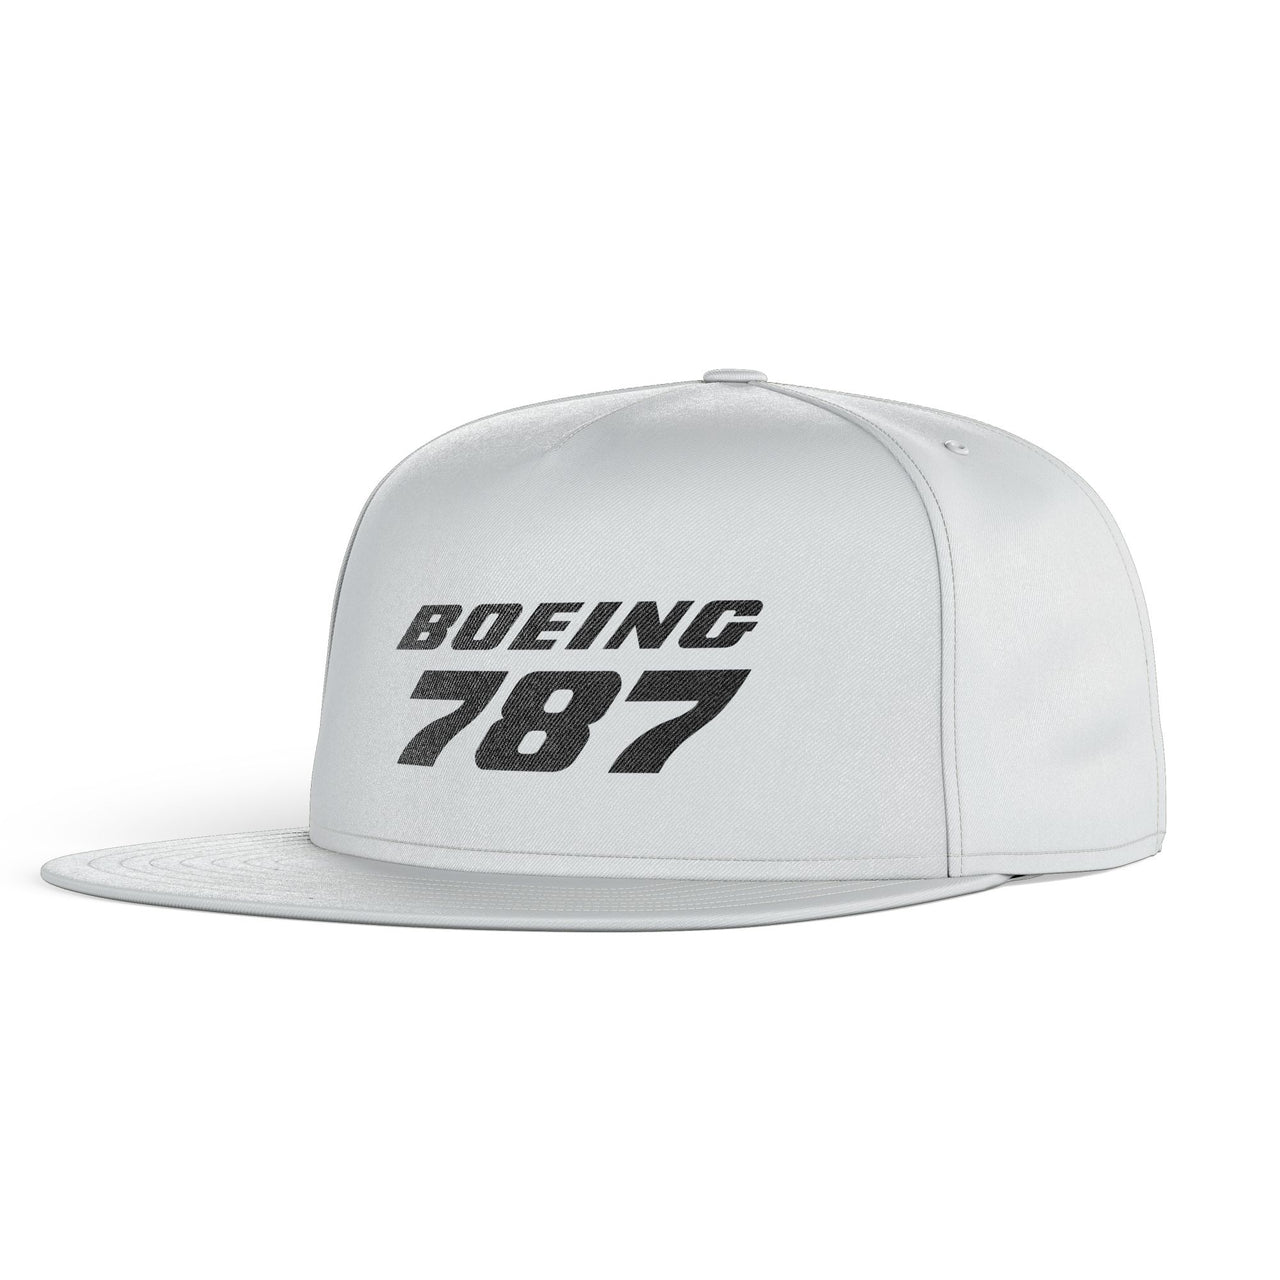 Boeing 787 & Text Designed Snapback Caps & Hats